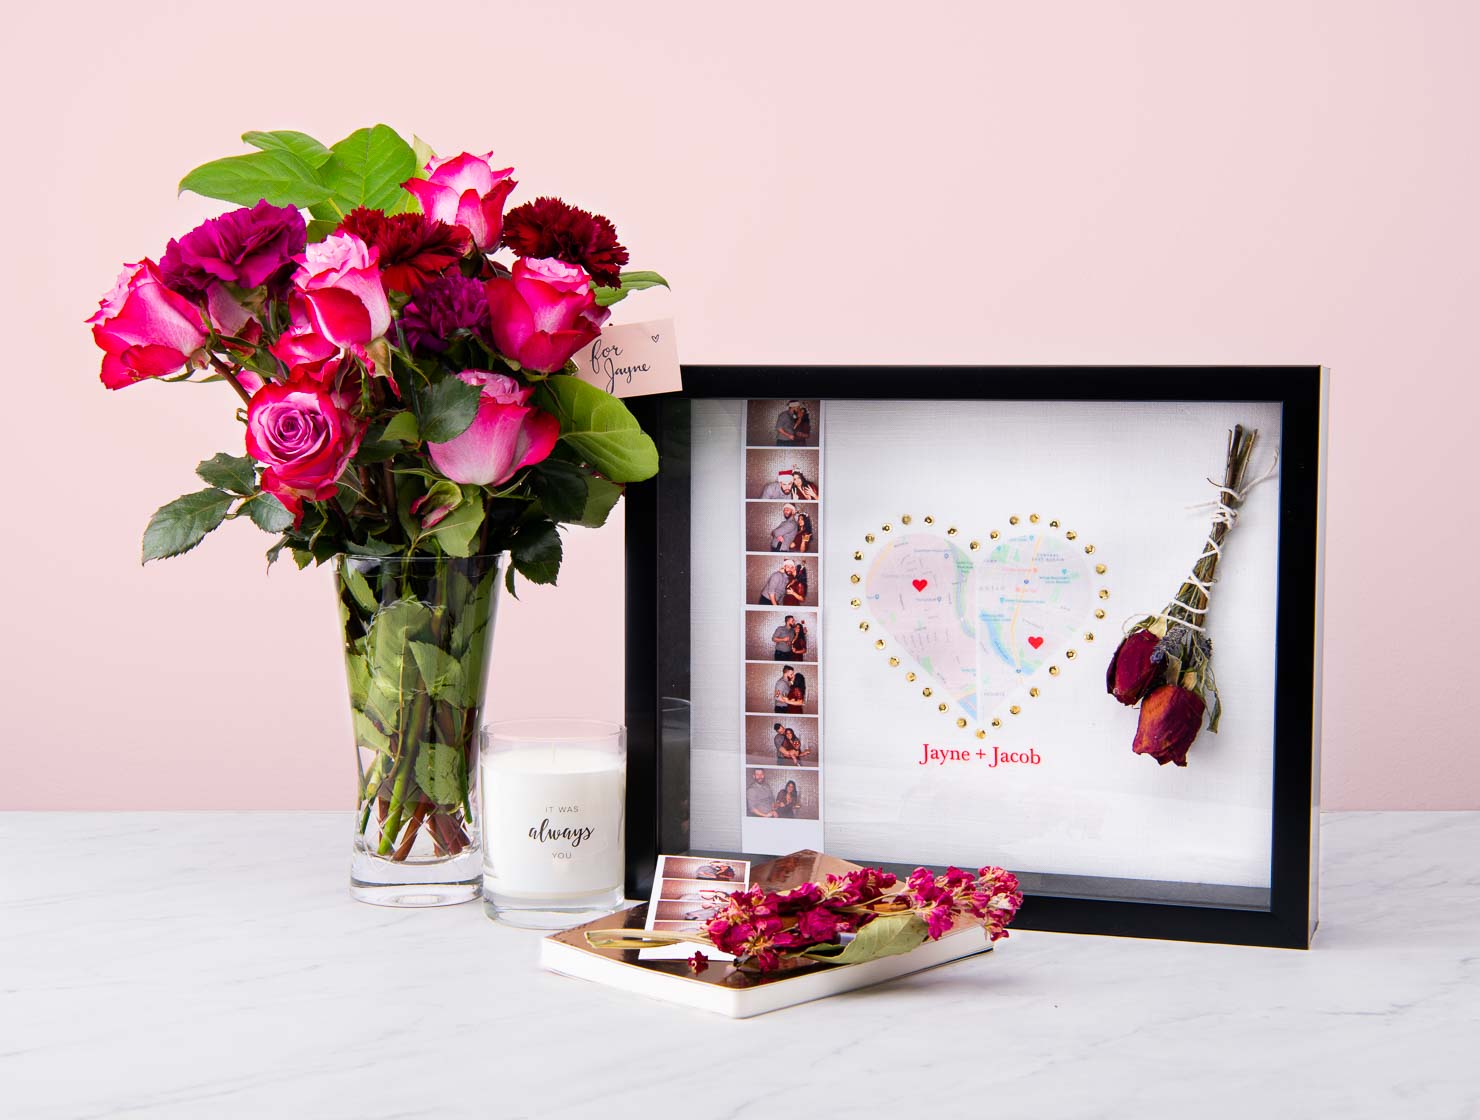 28 Shadow Box Ideas For Your Most Treasured Mementos | Ideas & Inspiration